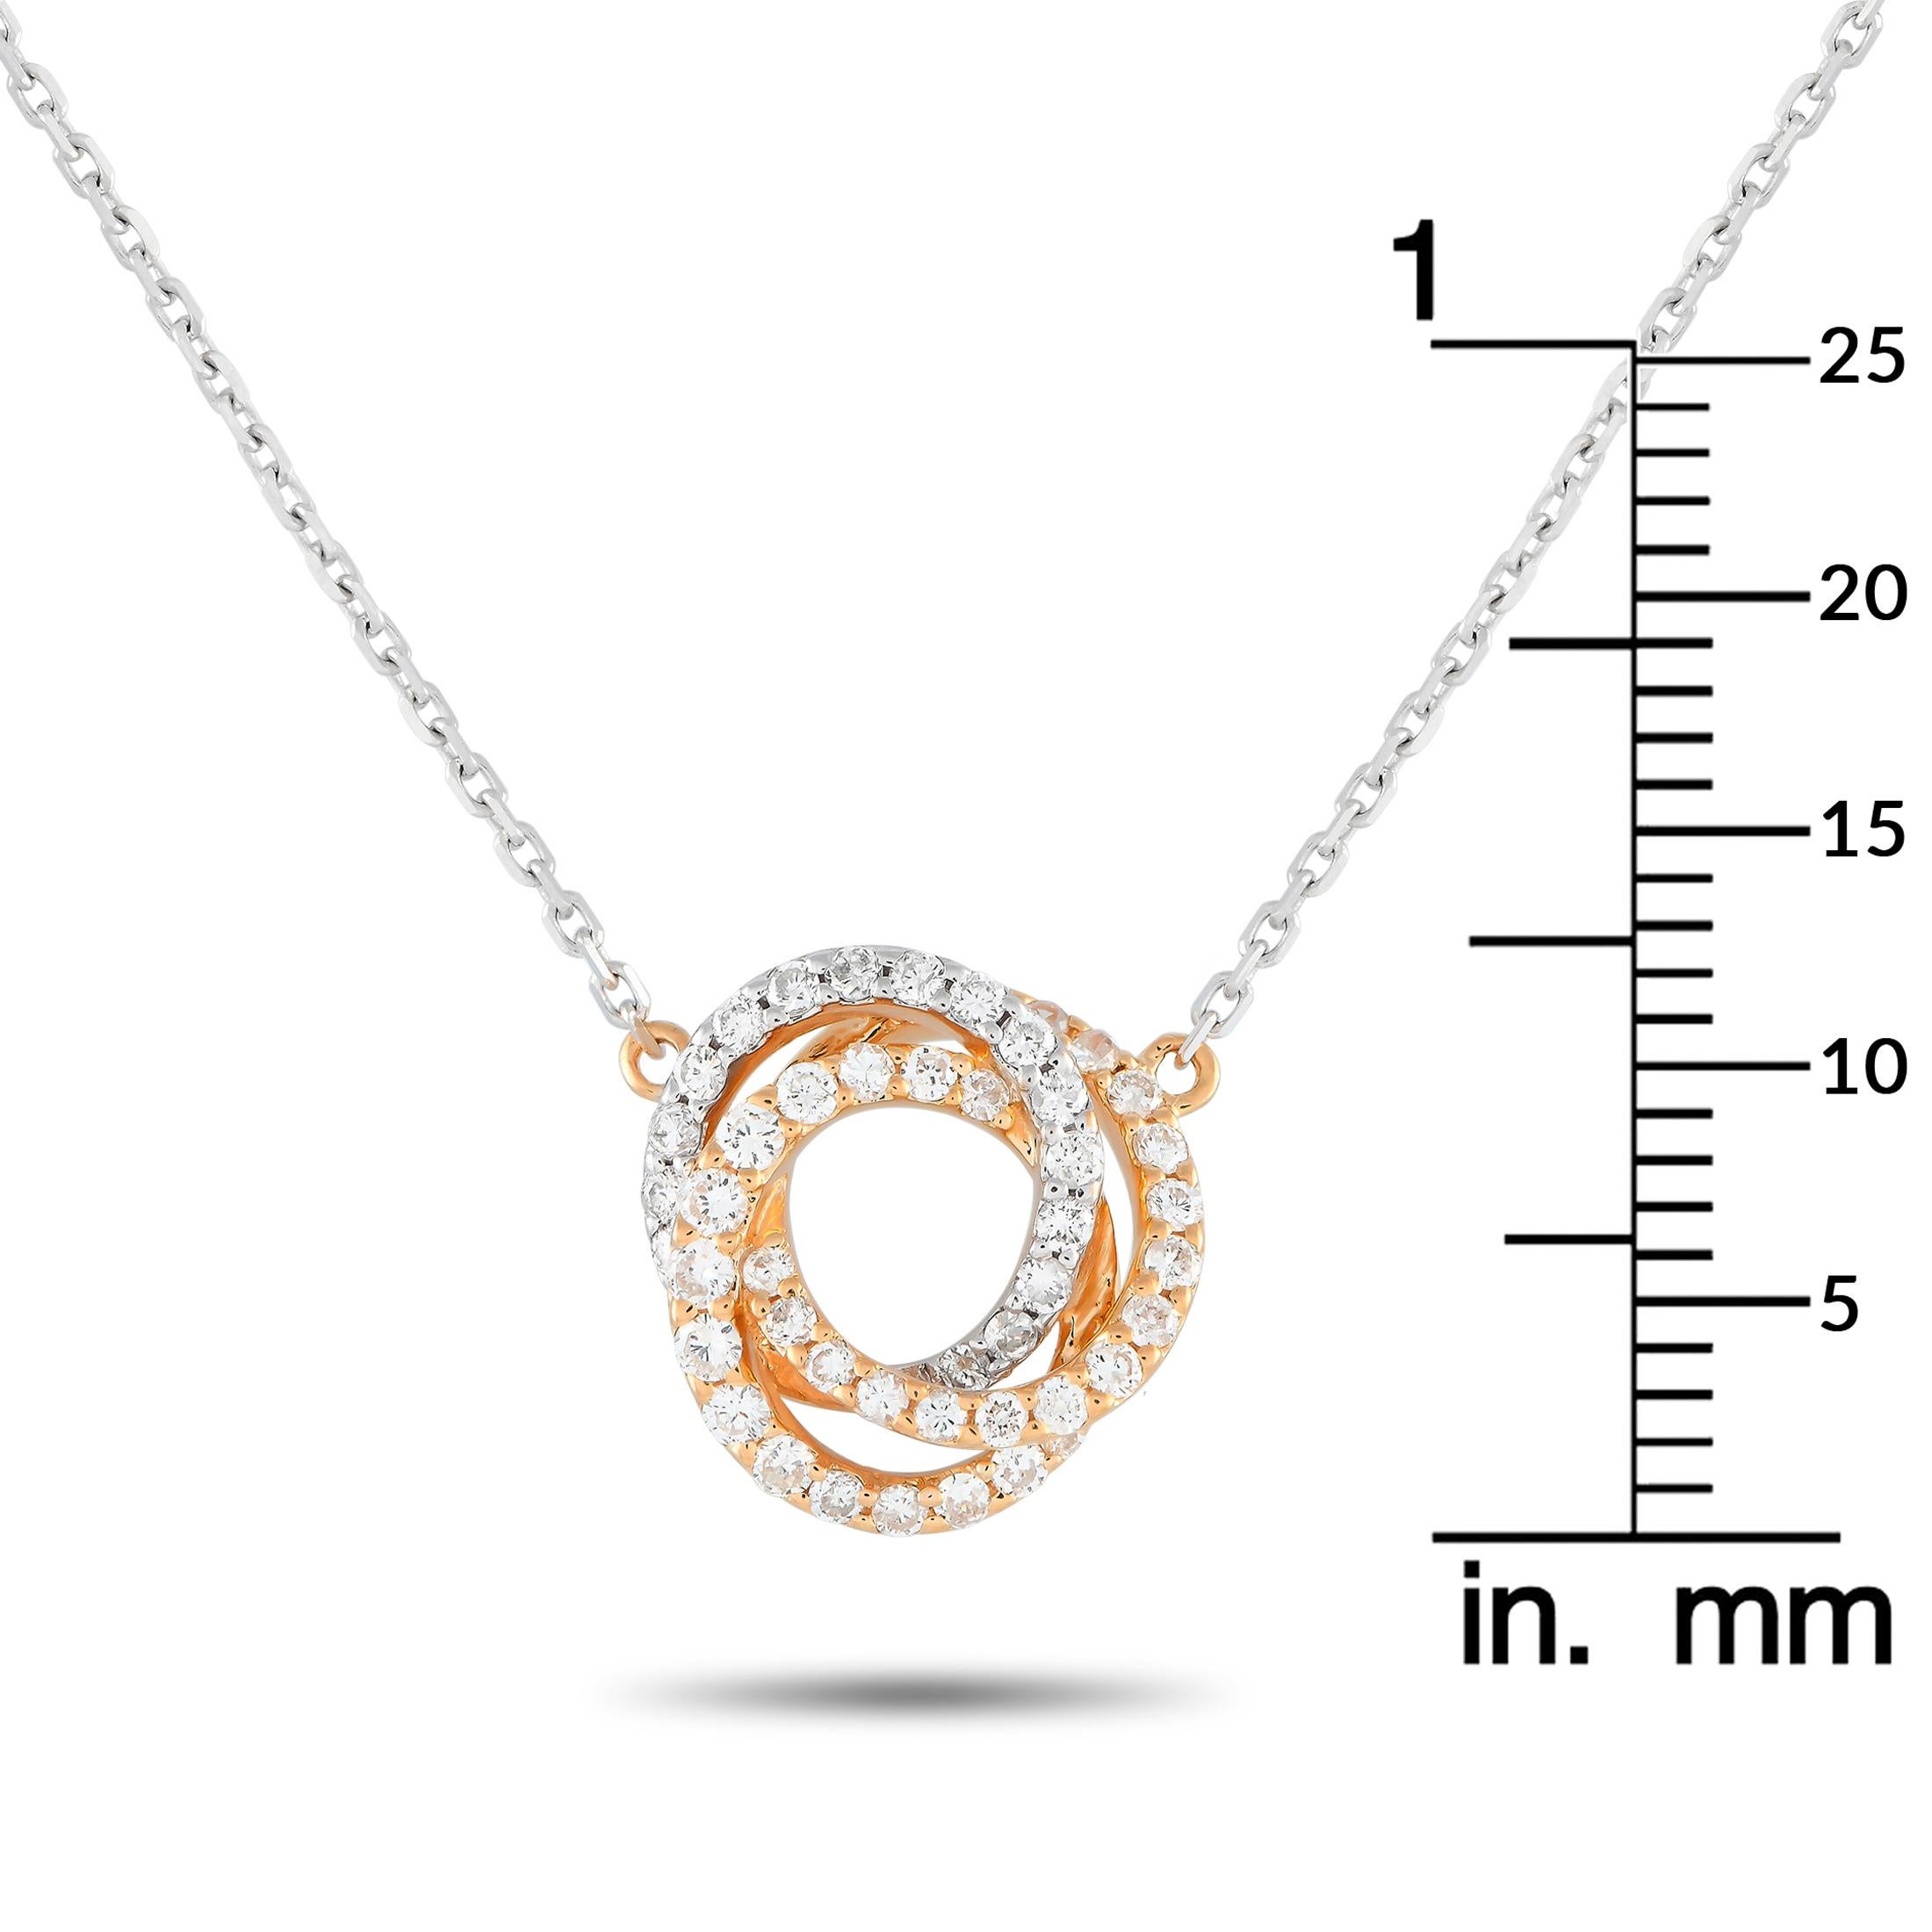 18K White and Rose Gold 0.50ct Diamond Triple Ring Necklace ANK-13200-TRI In New Condition For Sale In Southampton, PA